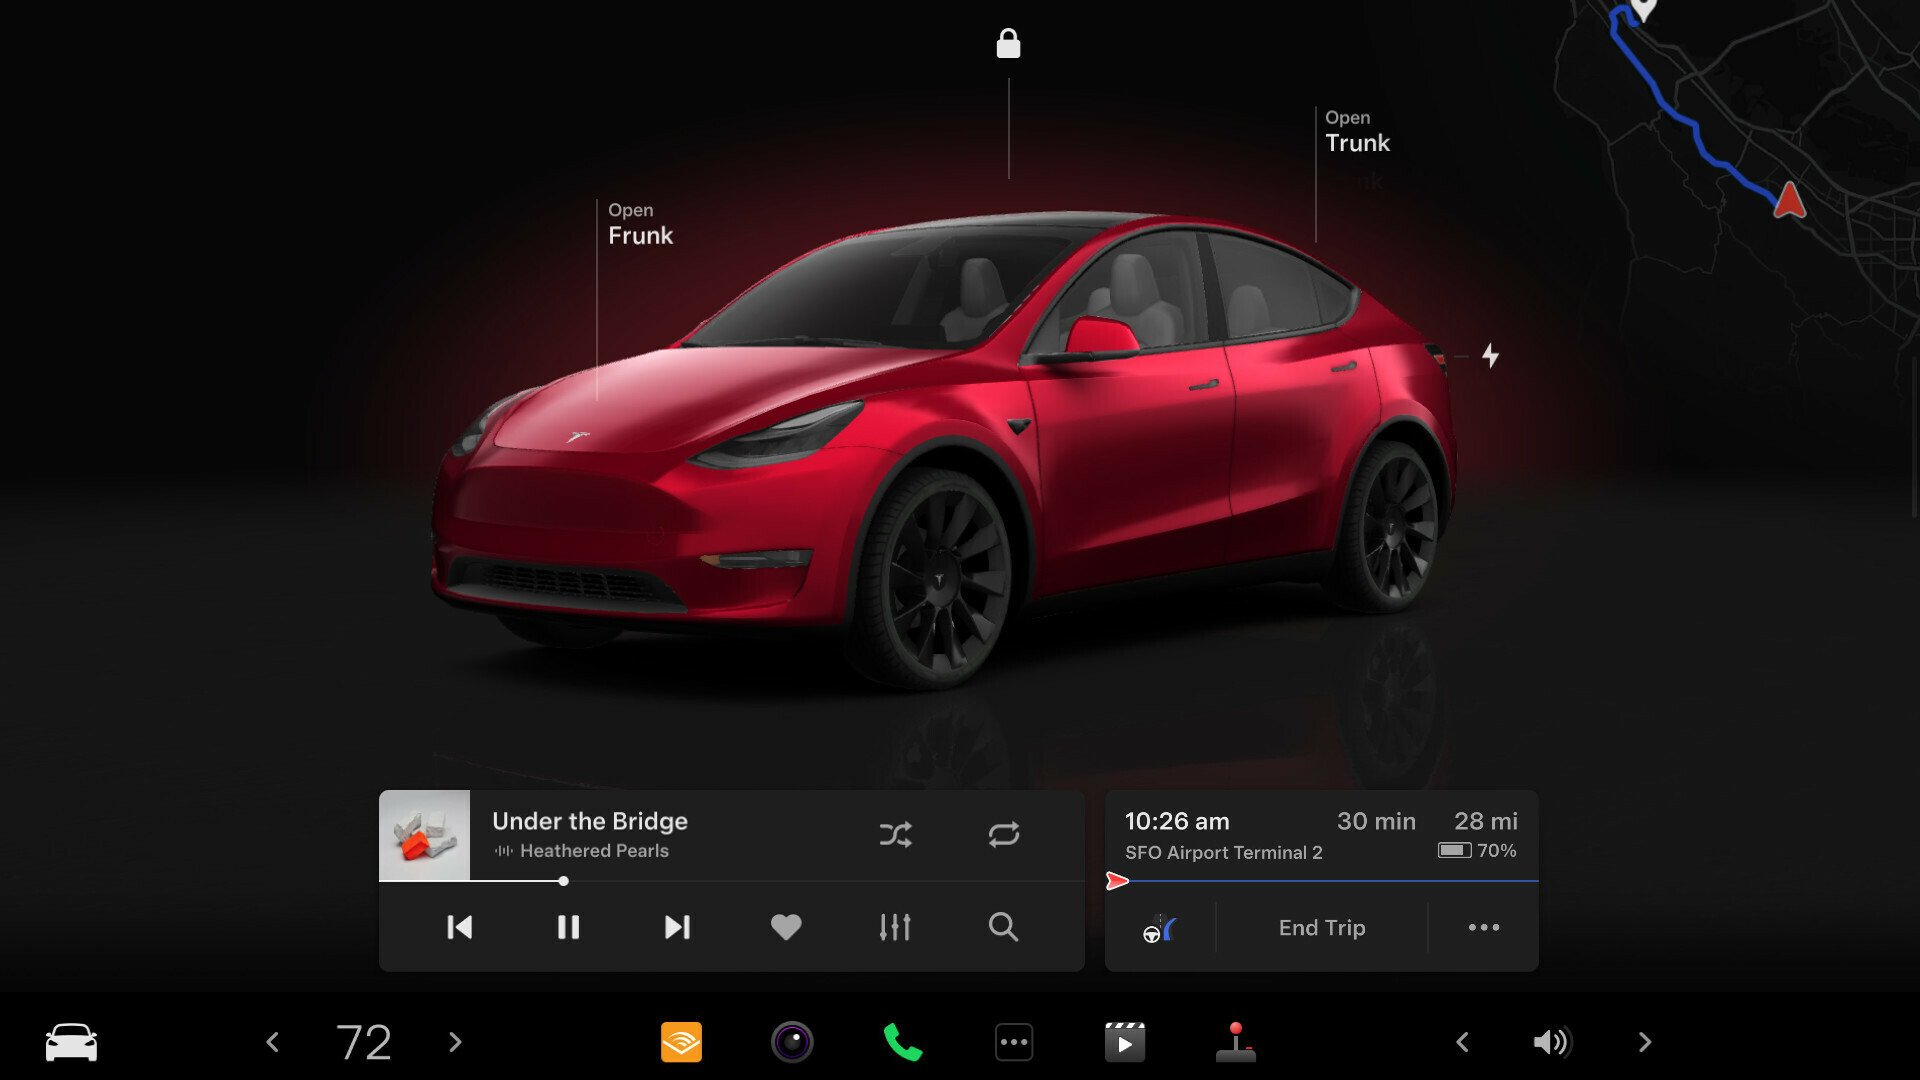 A view of the Tesla software with the car in the centre.